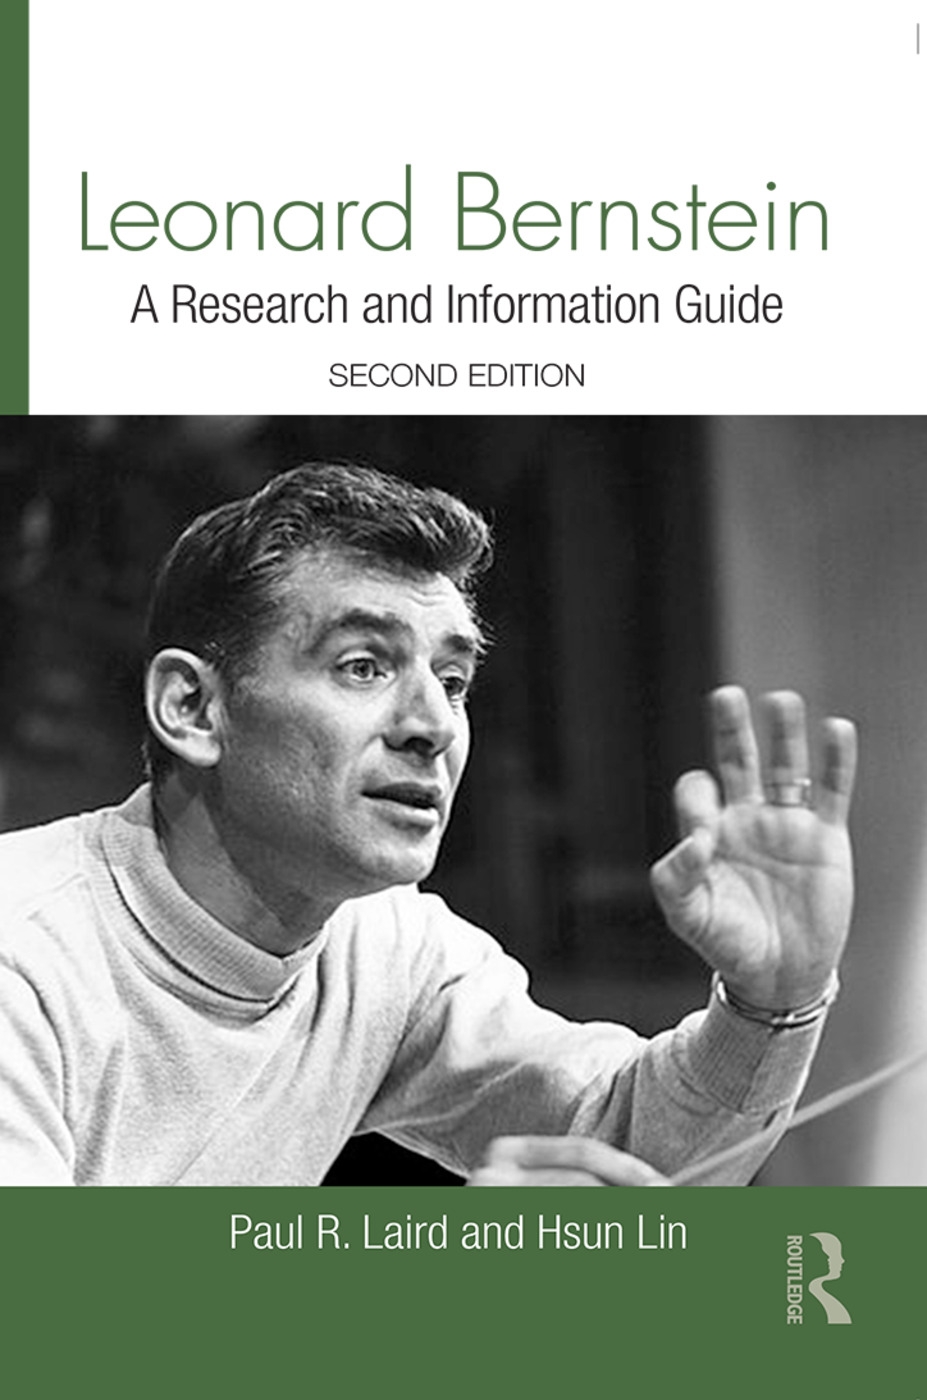 Leonard Bernstein: A Research and Information Guide